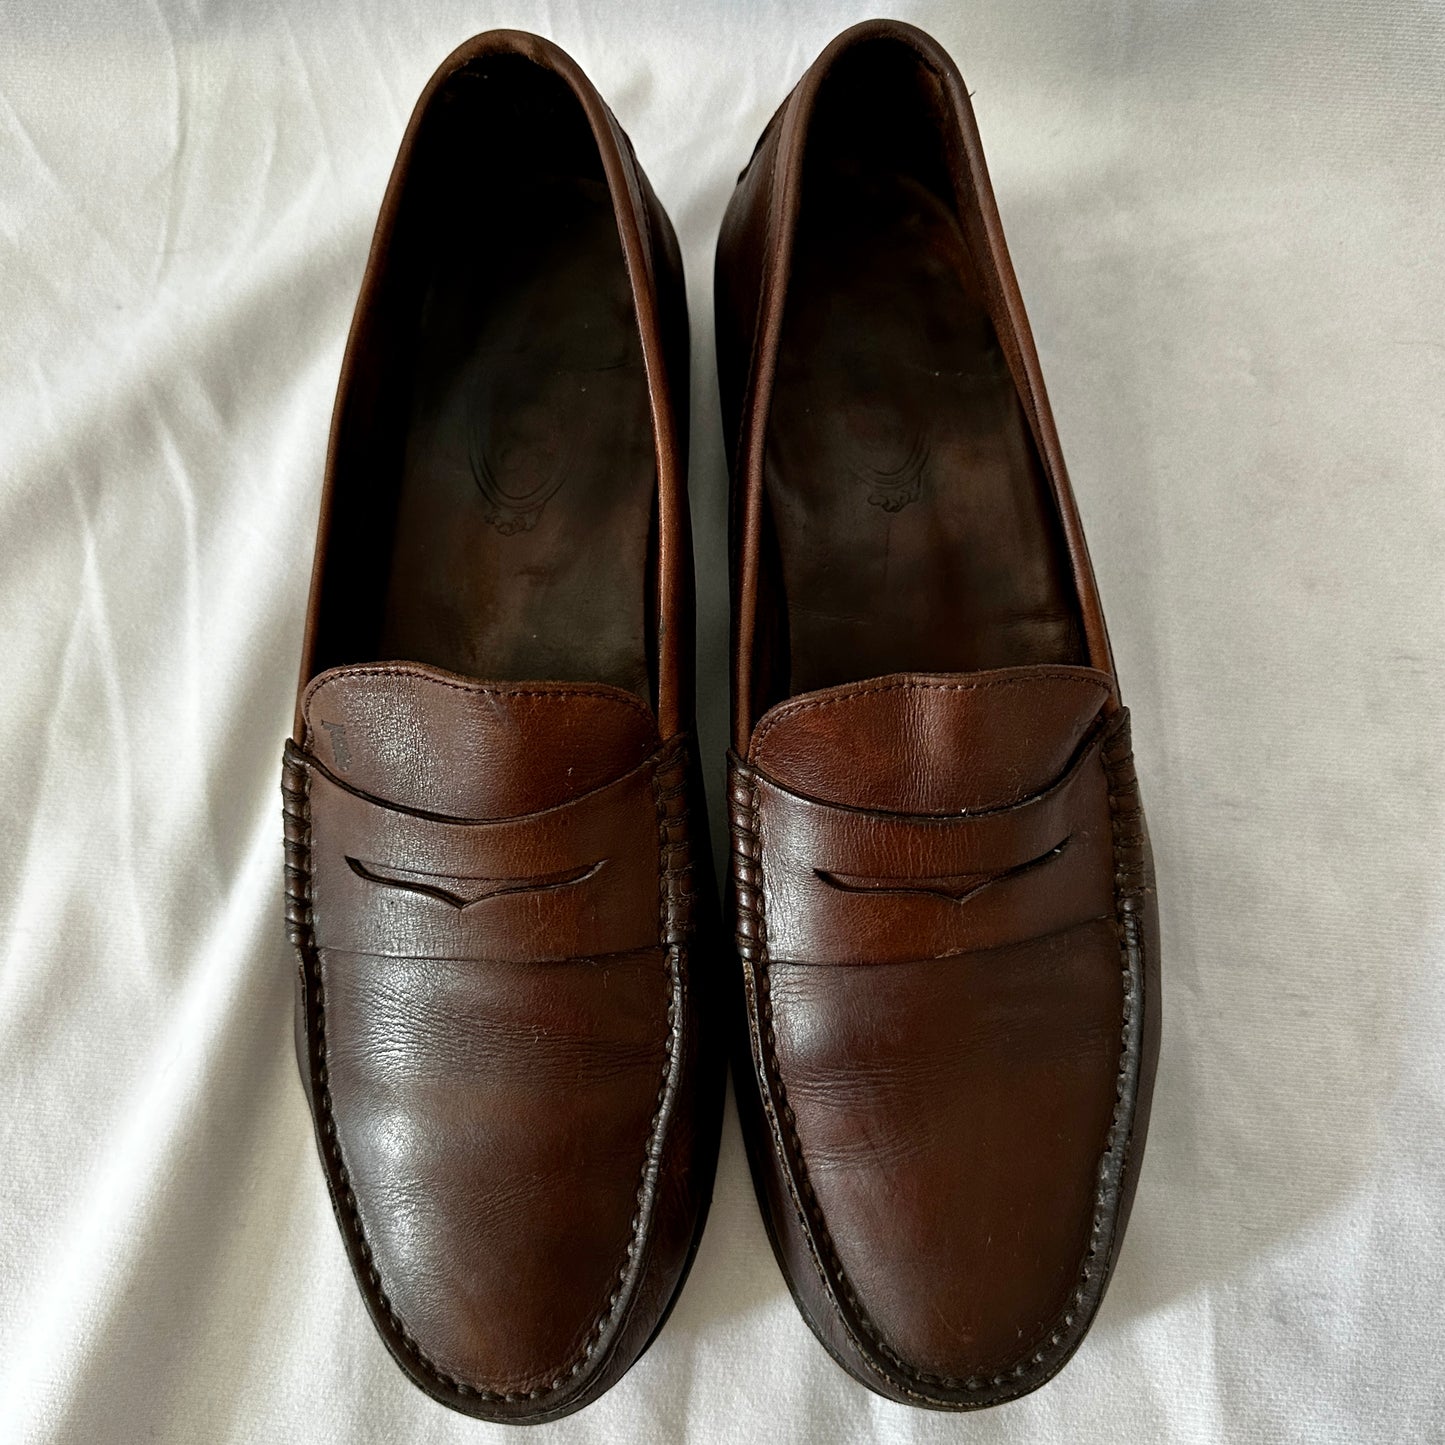 Tod's Loafers Dark Brown Leather 10.5 - Made in Italy